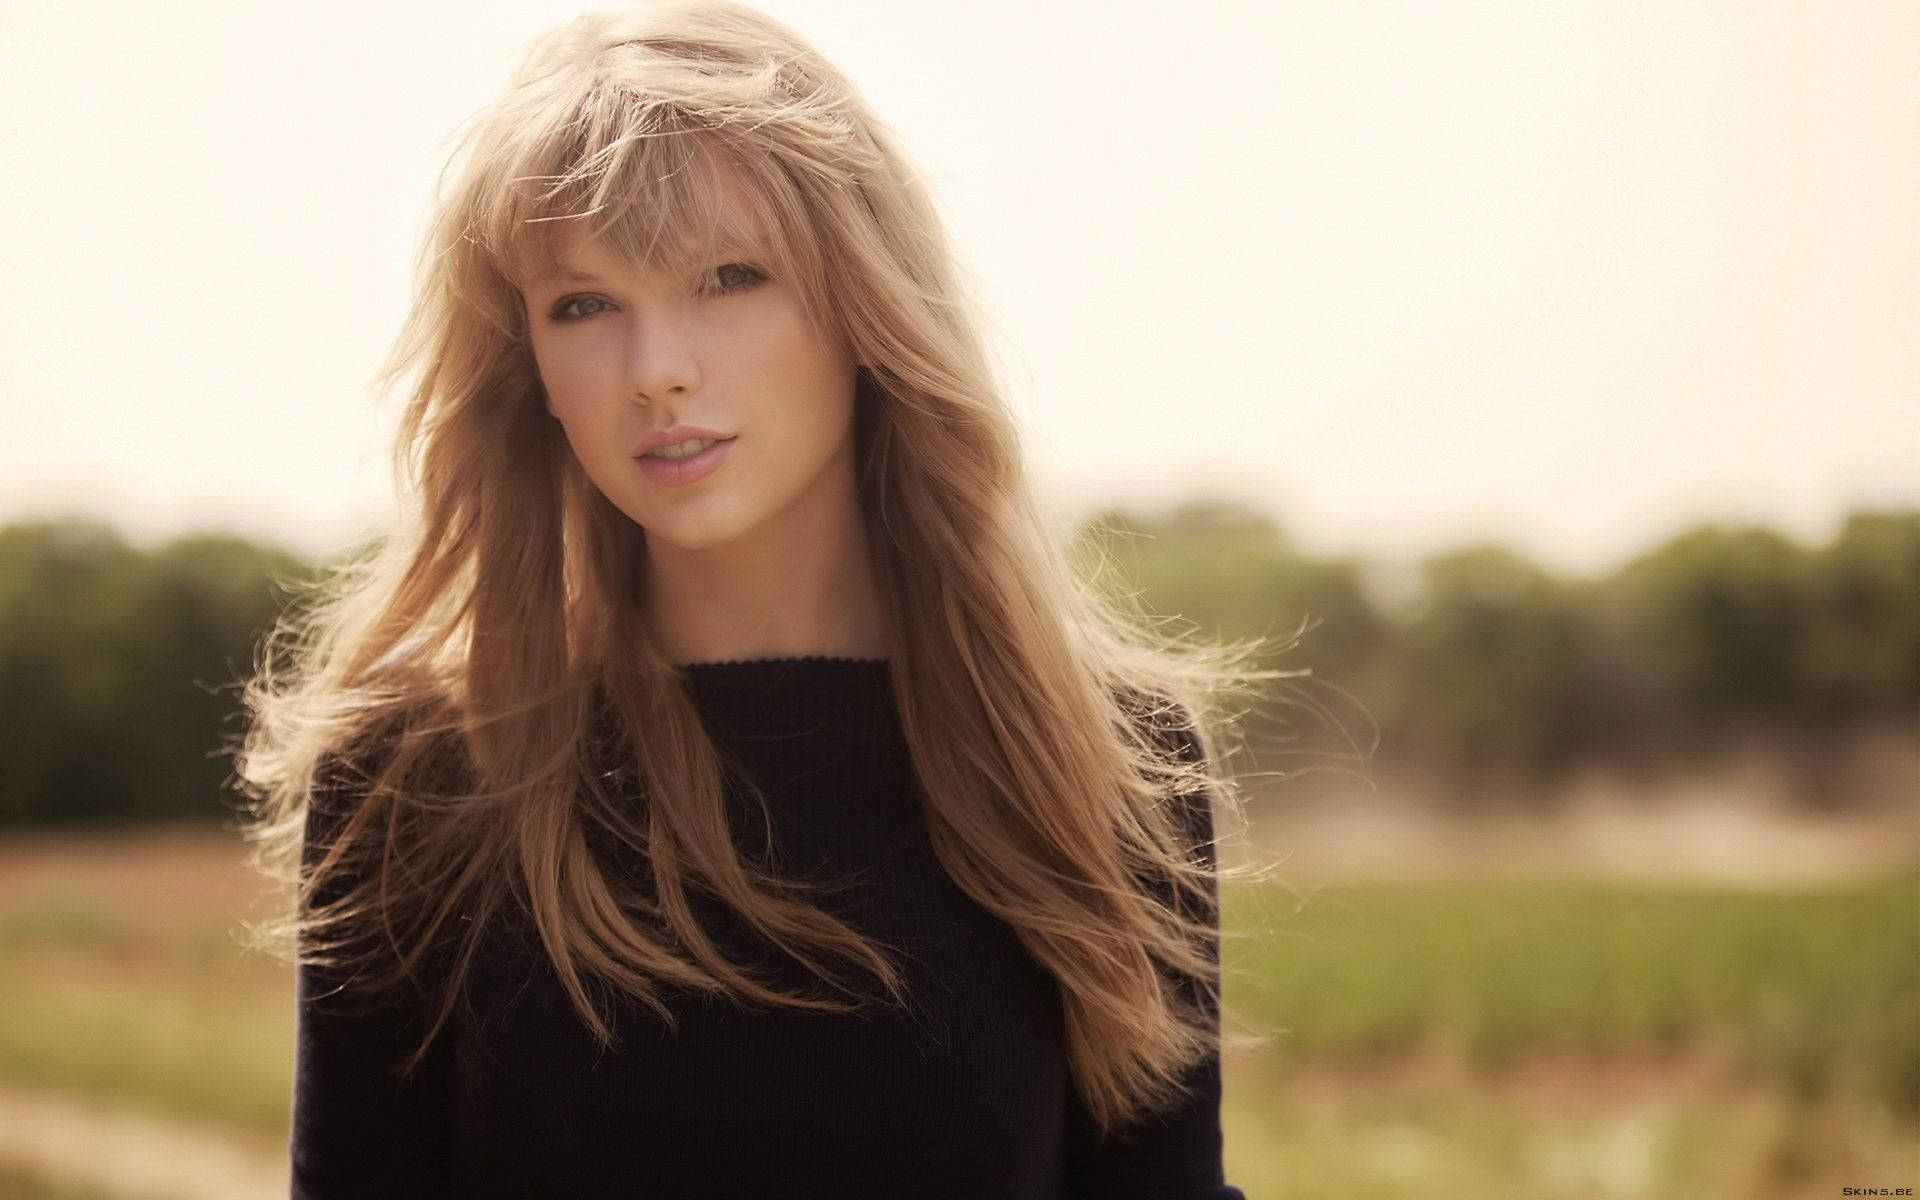 Taylor Swift music video with straightened hair and black shirt.